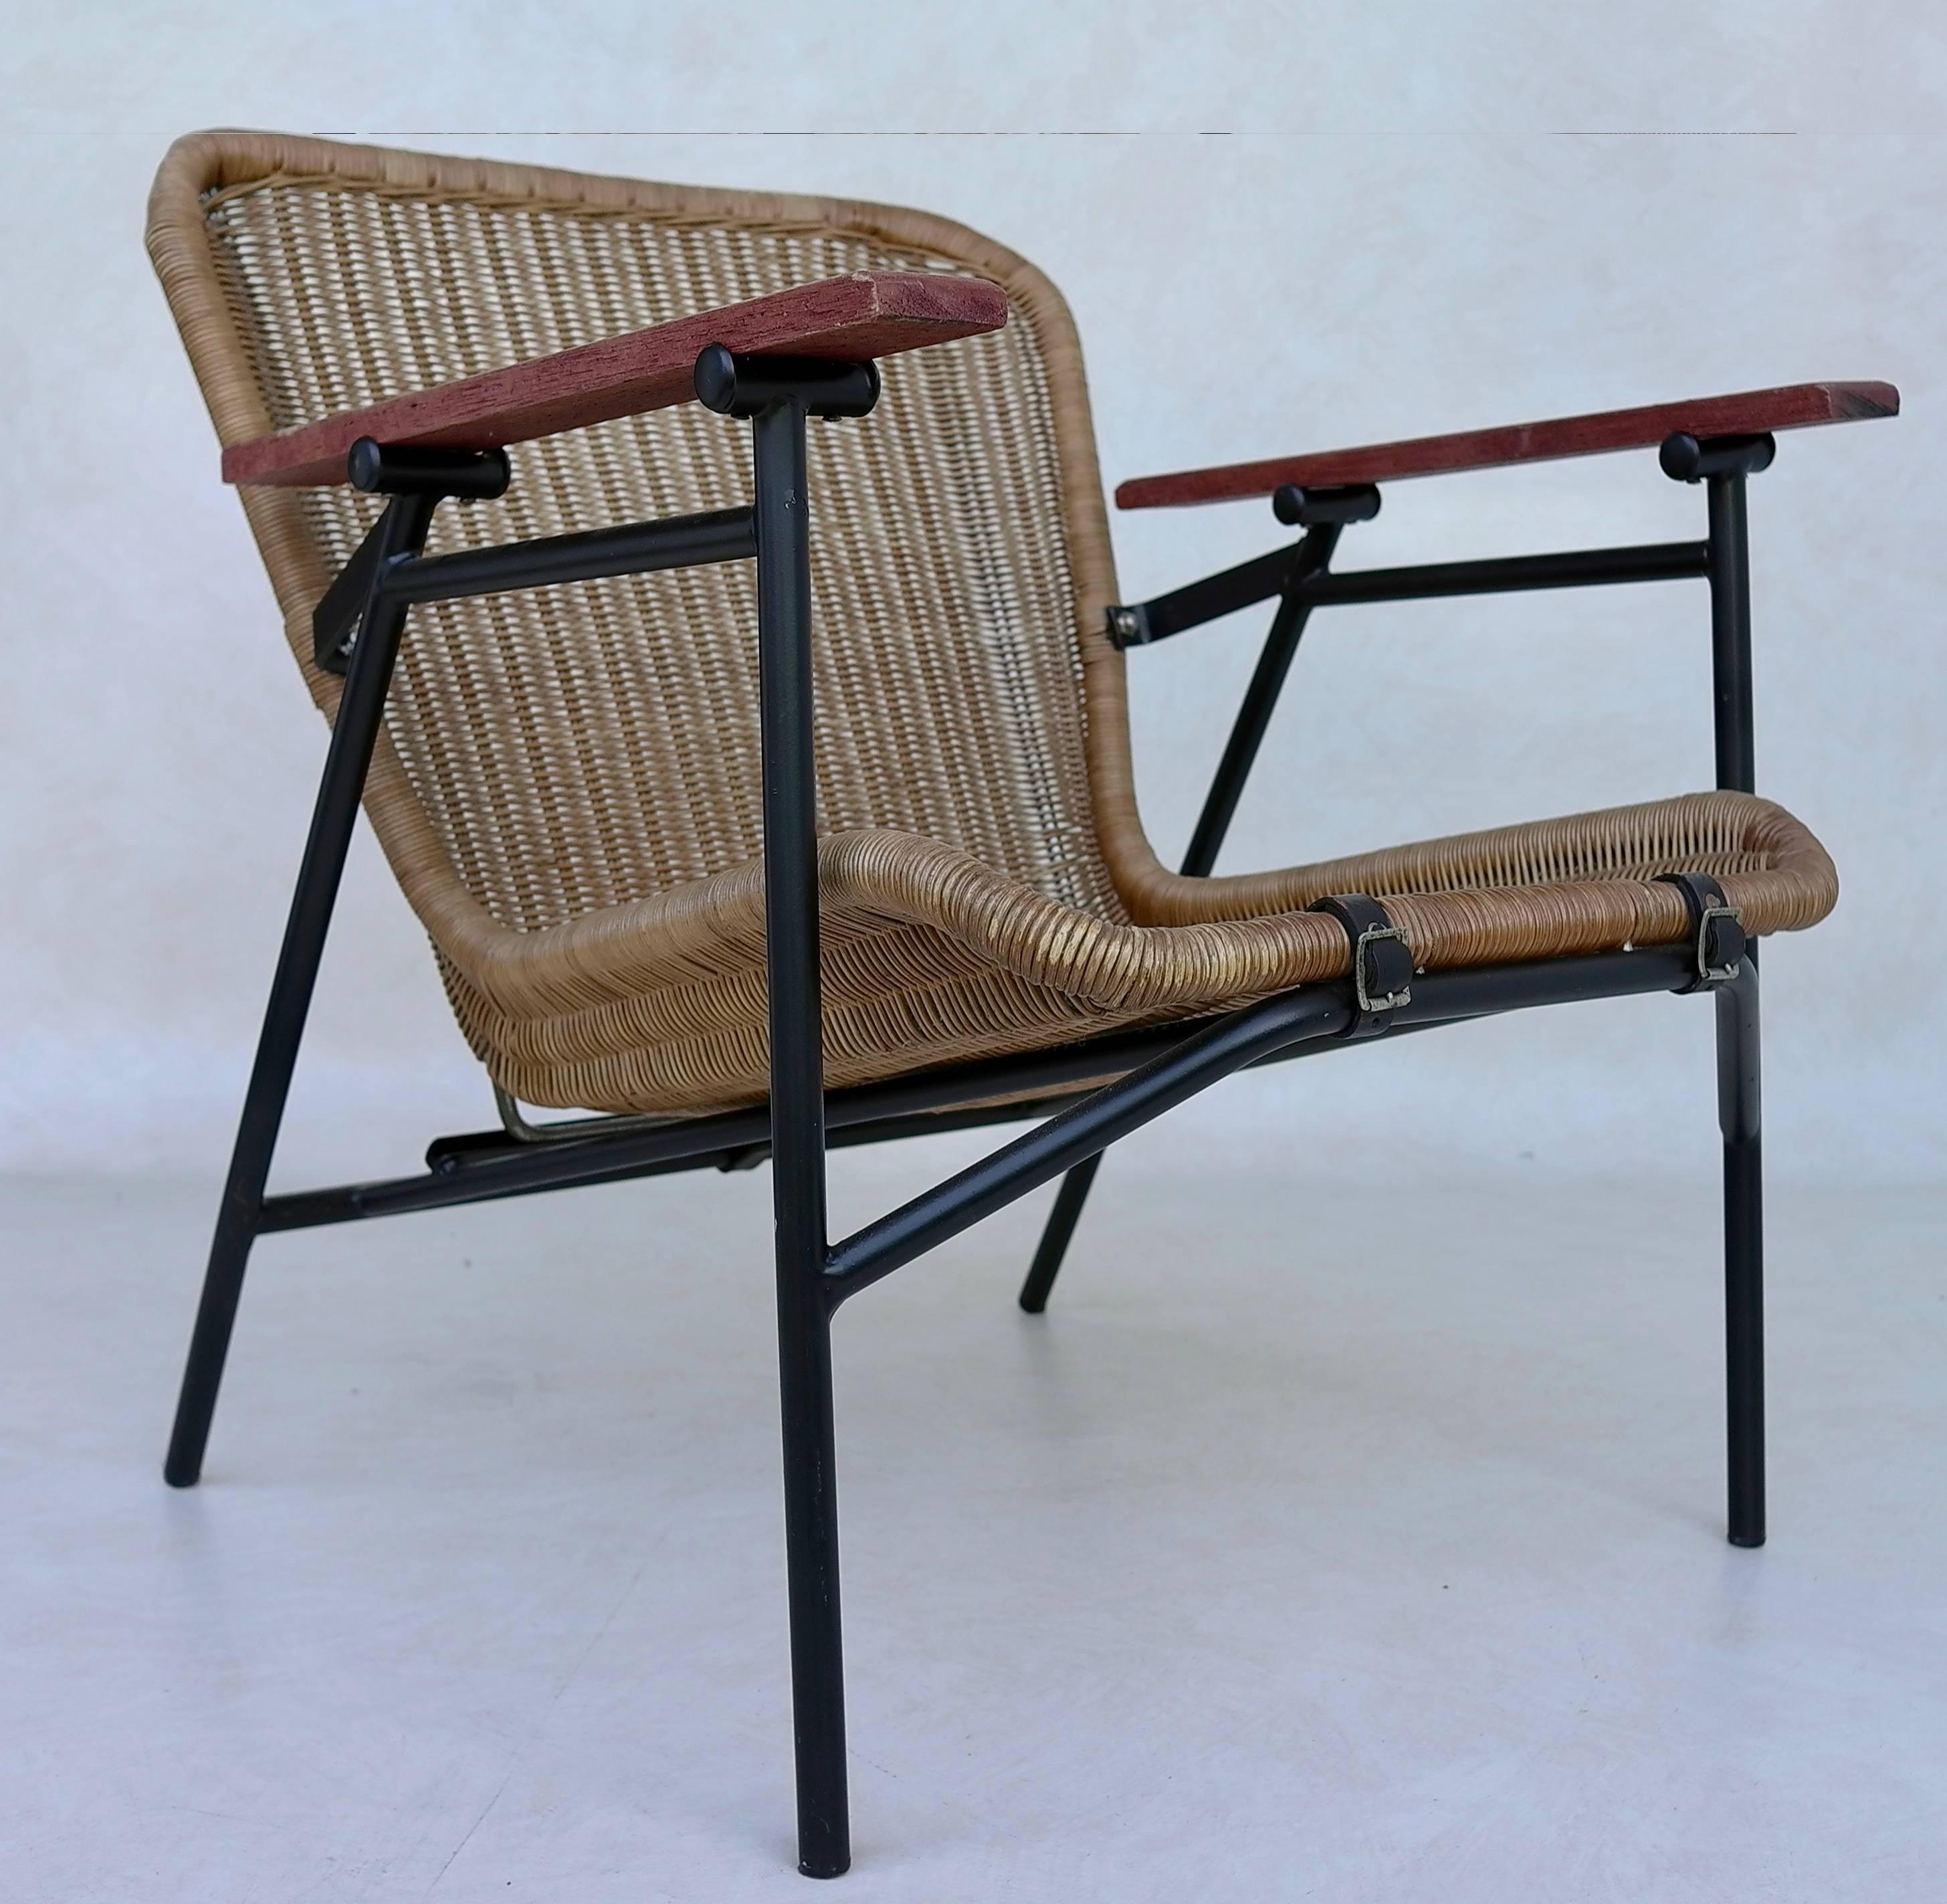 Rare dirk van Sliedregt armchair in Rattan and steel secured with three black leather straps.